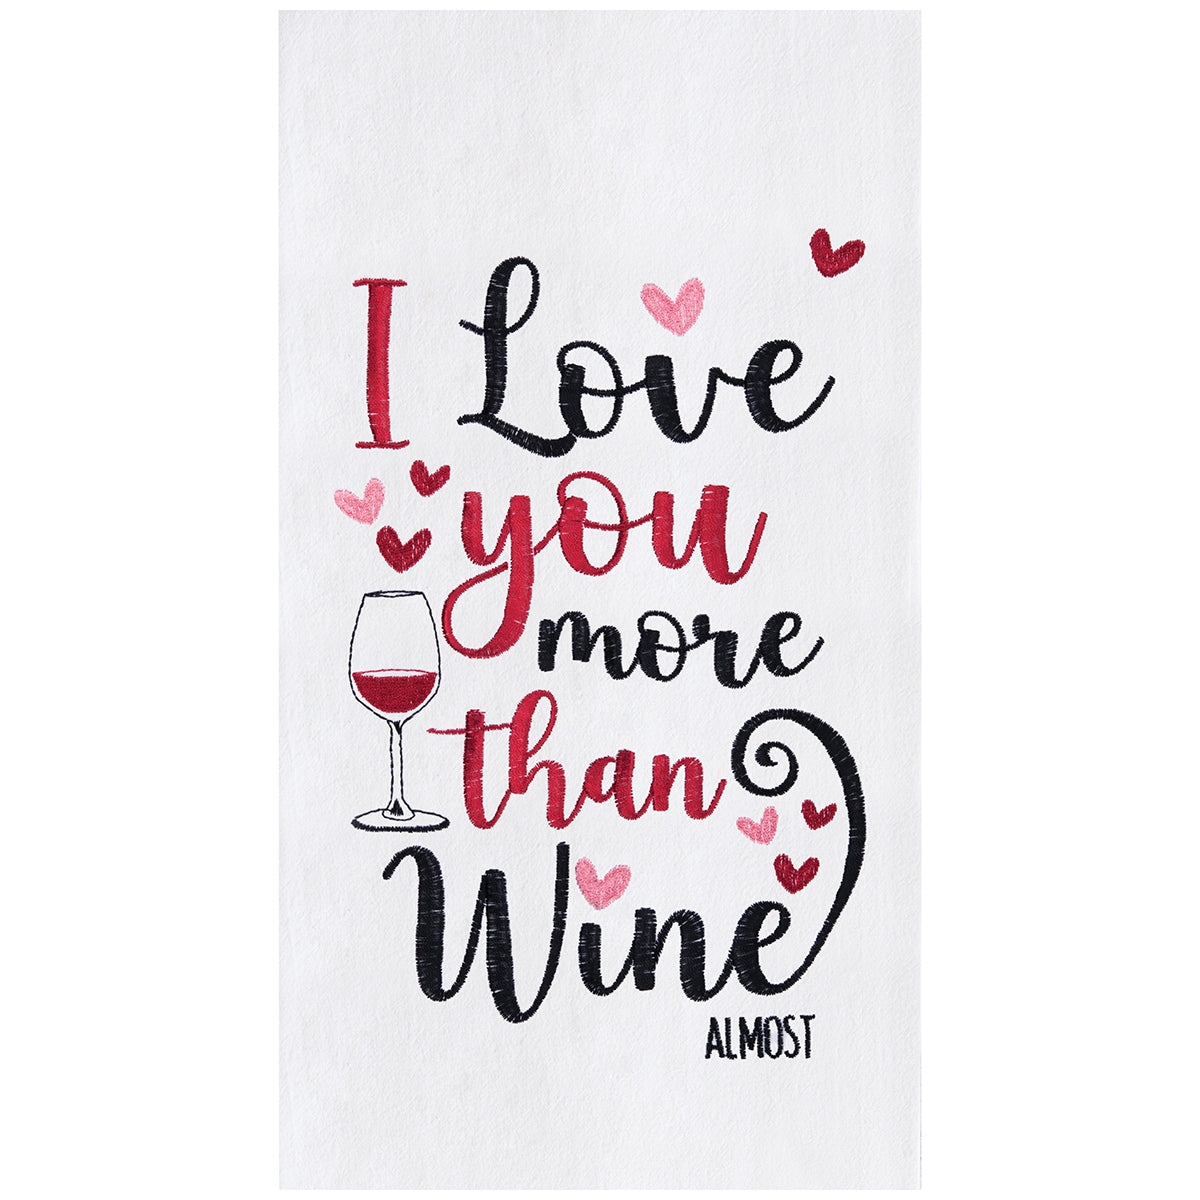 I Love You More Than Wine (Almost) Embroidered Flour Sack Kitchen Towel    